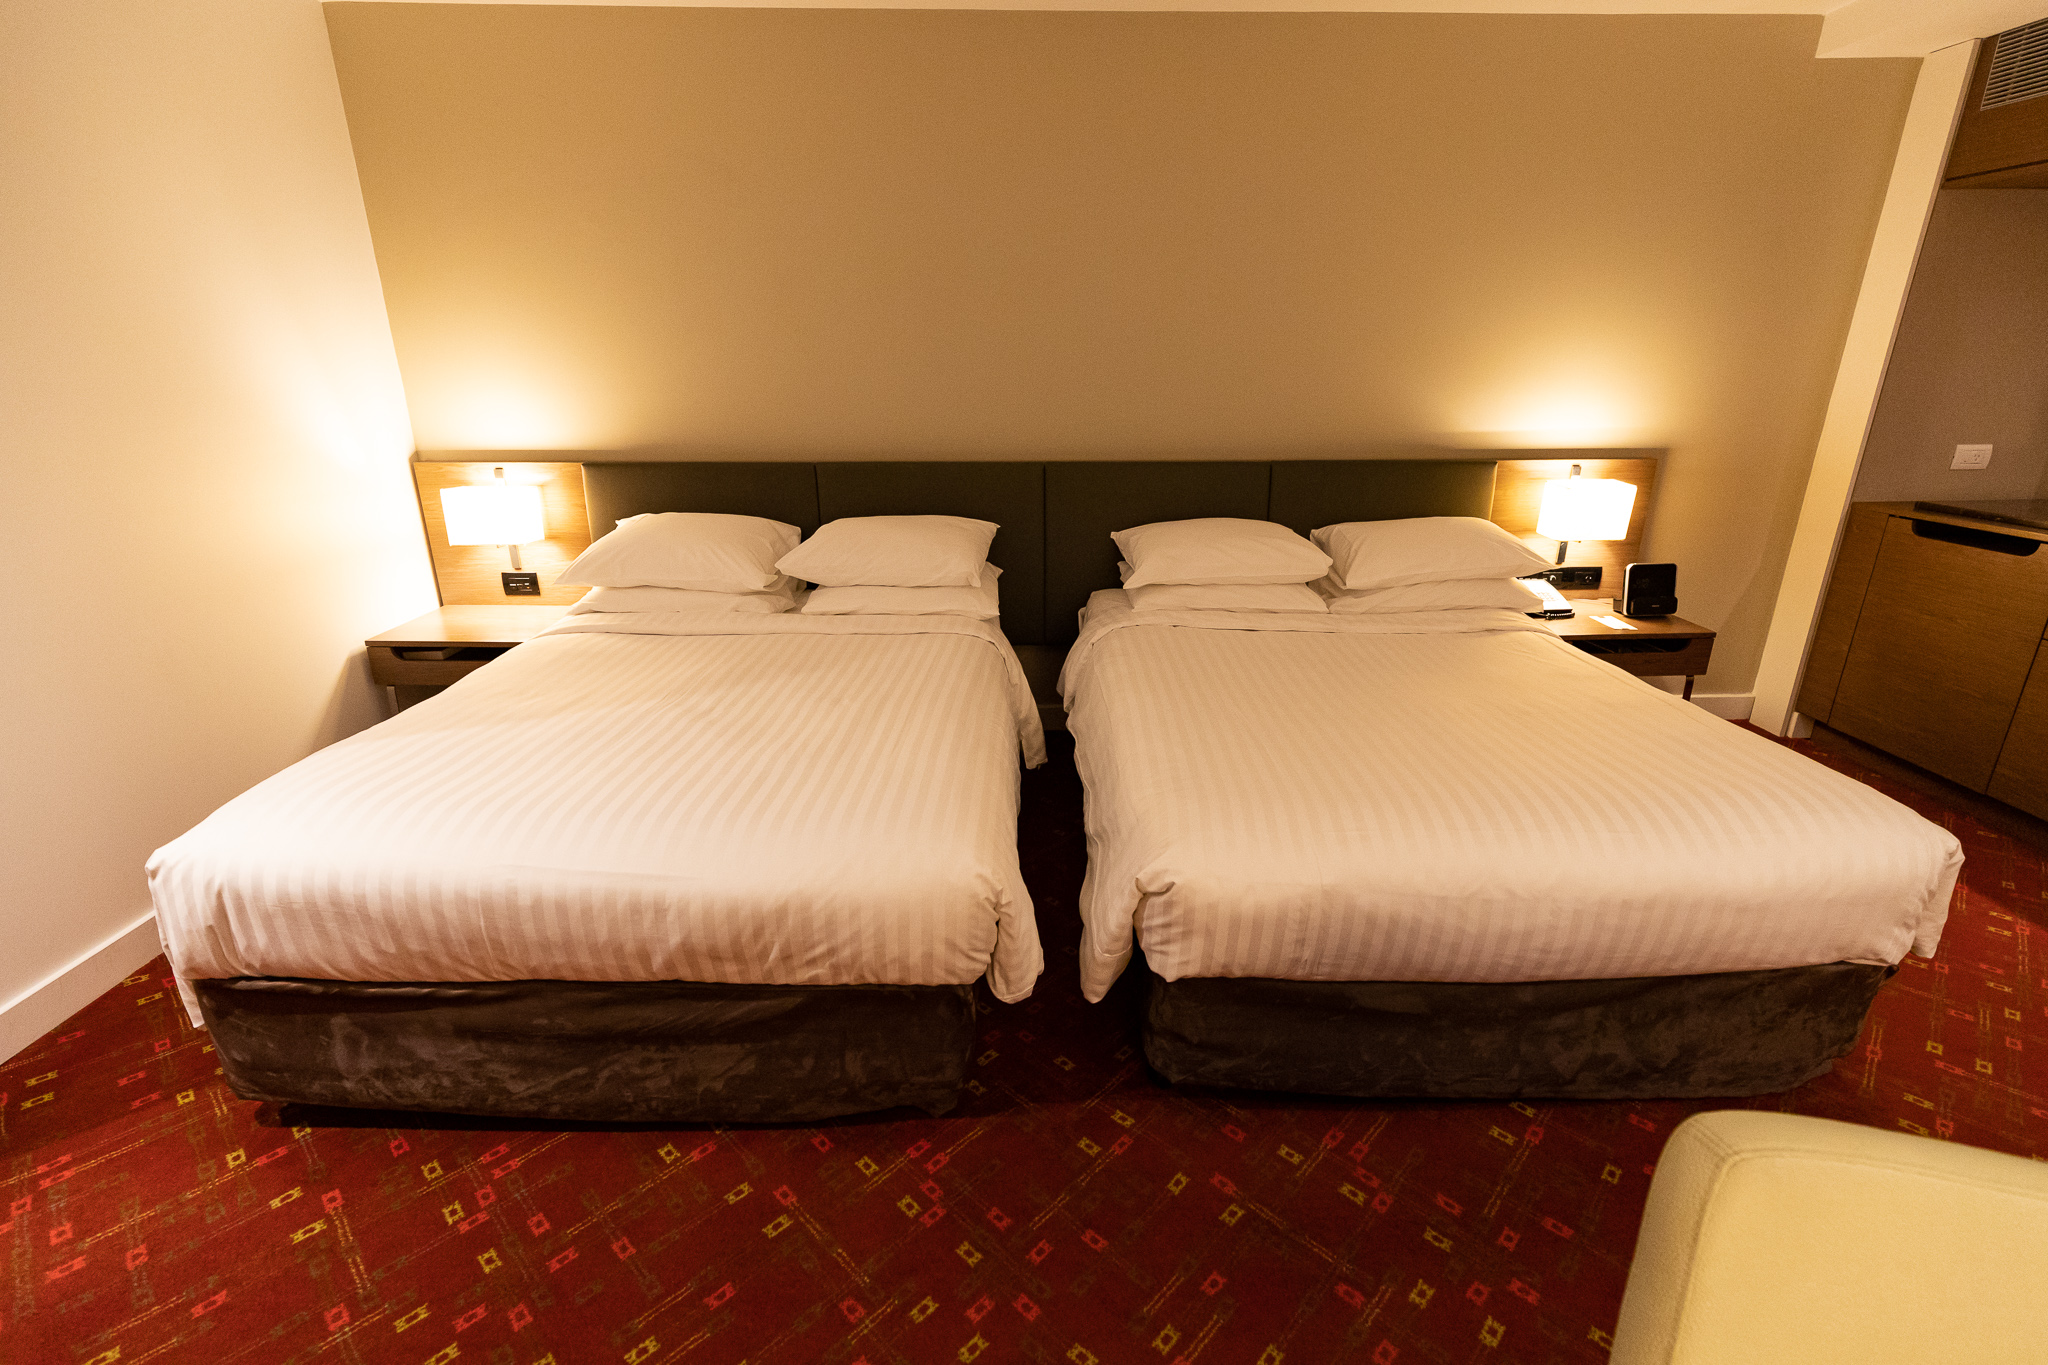 two beds with white sheets and pillows in a room with red carpet